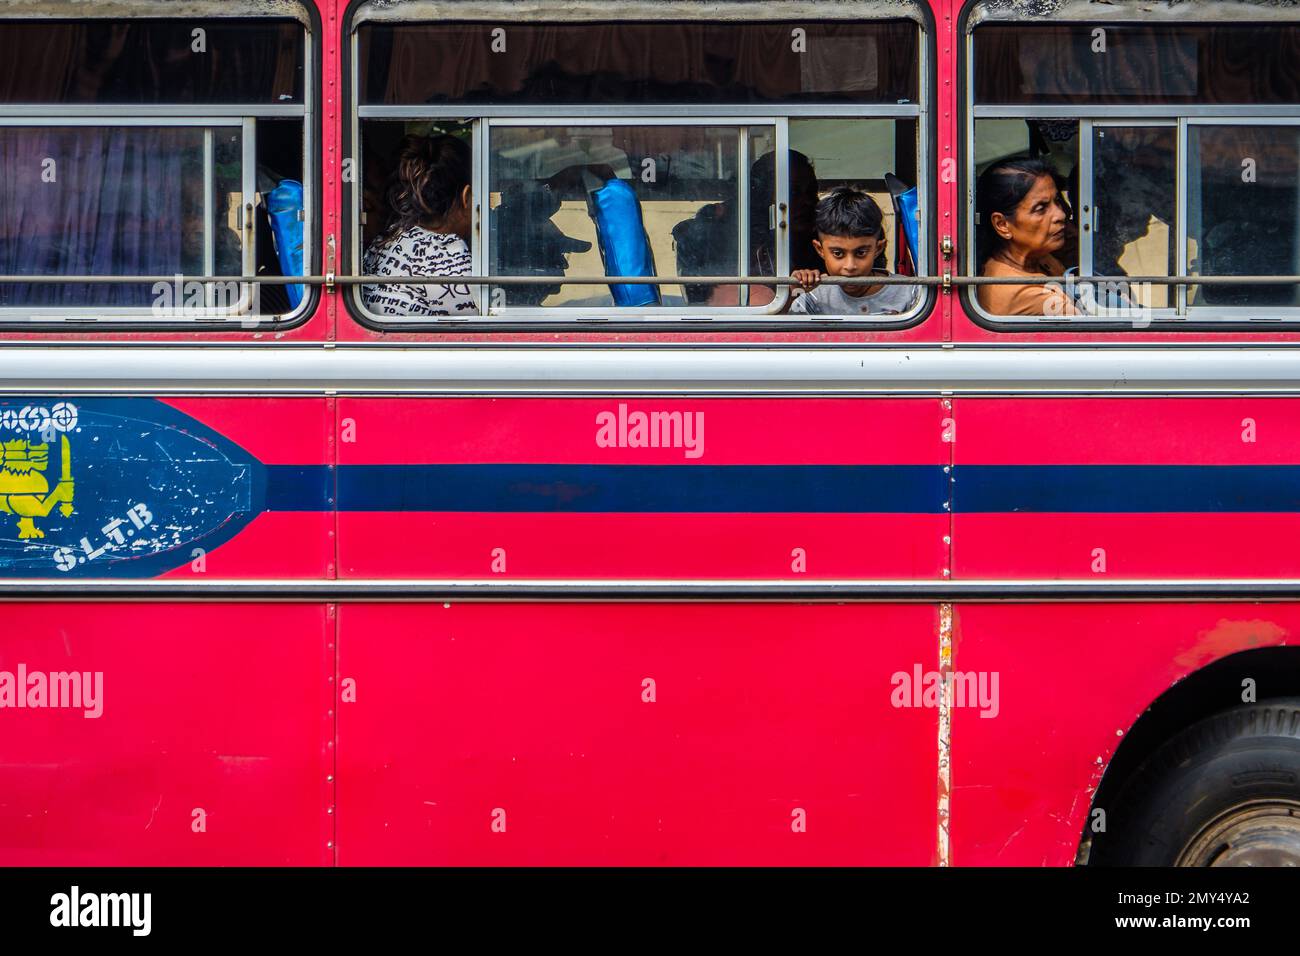 Passengers on a bus at The bus station in Jaffna, northern Sri Lanka Stock Photo